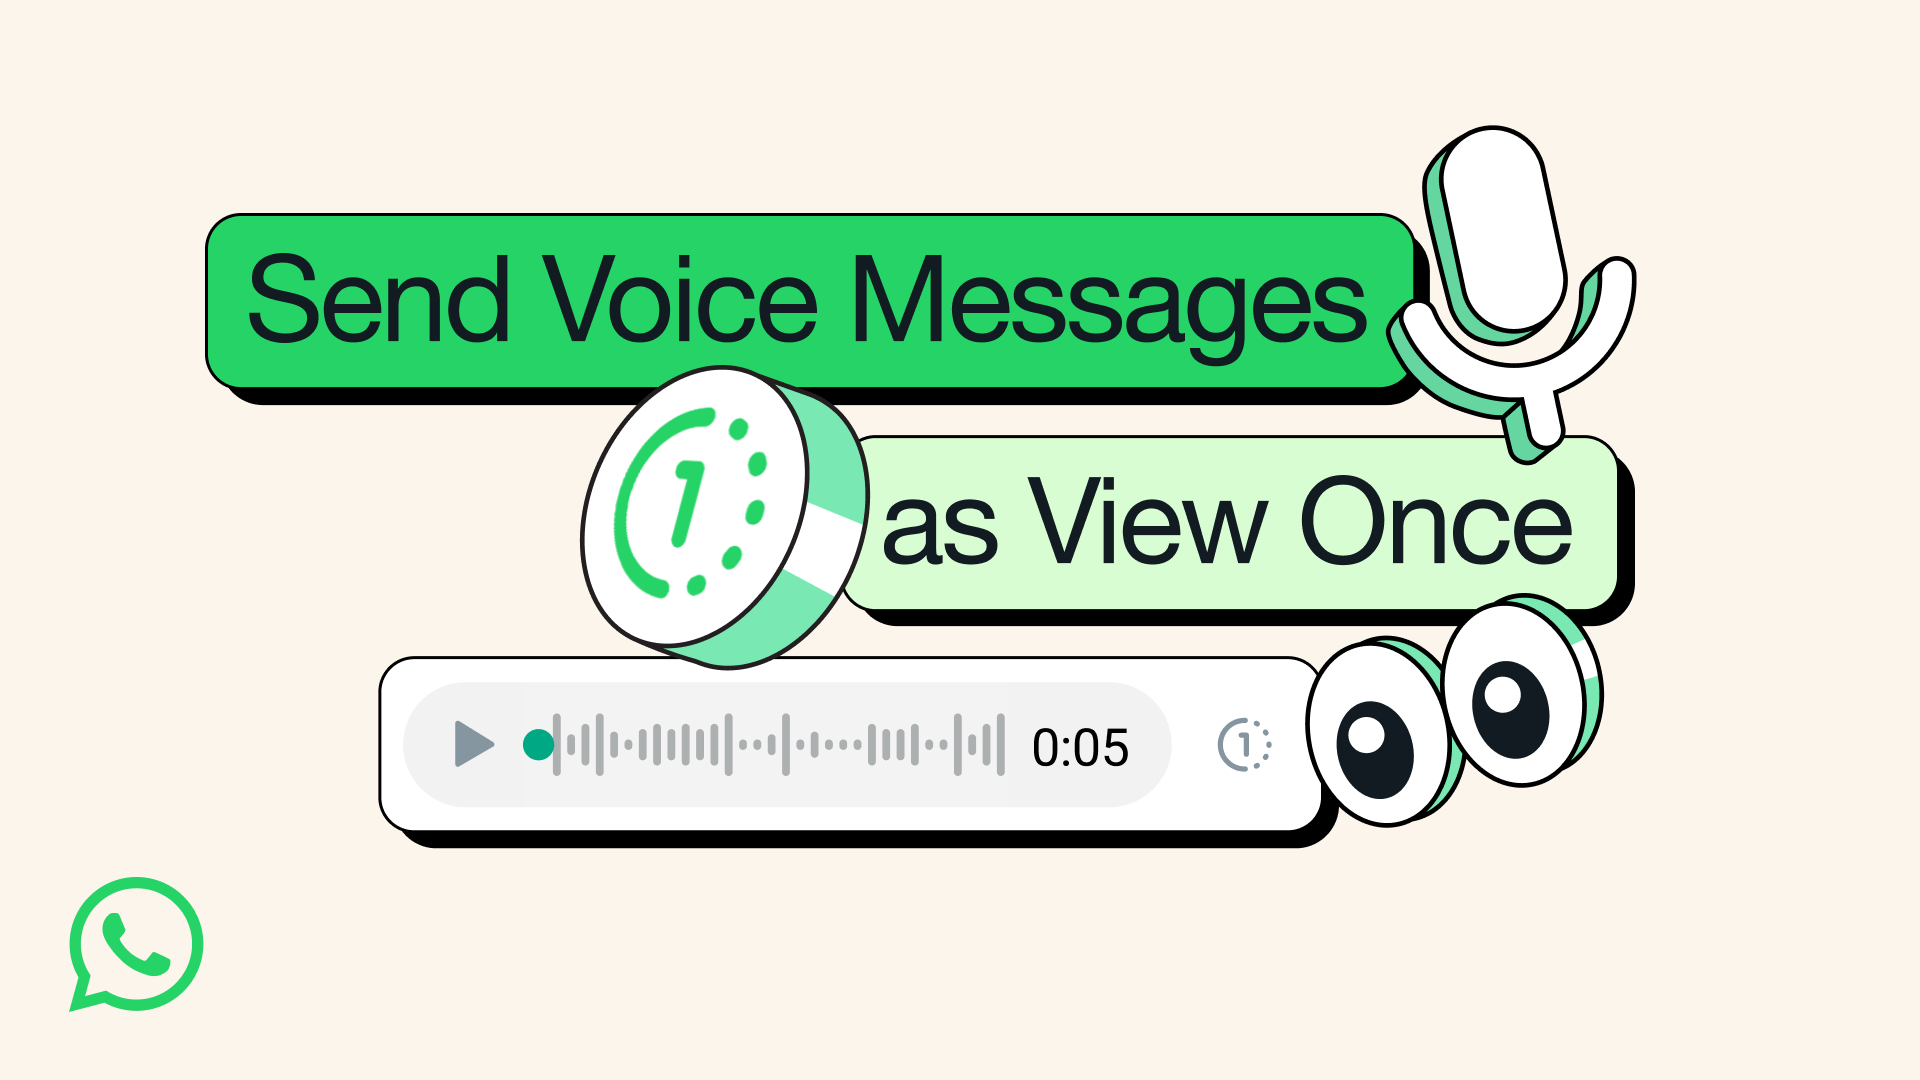 WhatsApp adds ‘view once’ option to voice messages for additional privacy